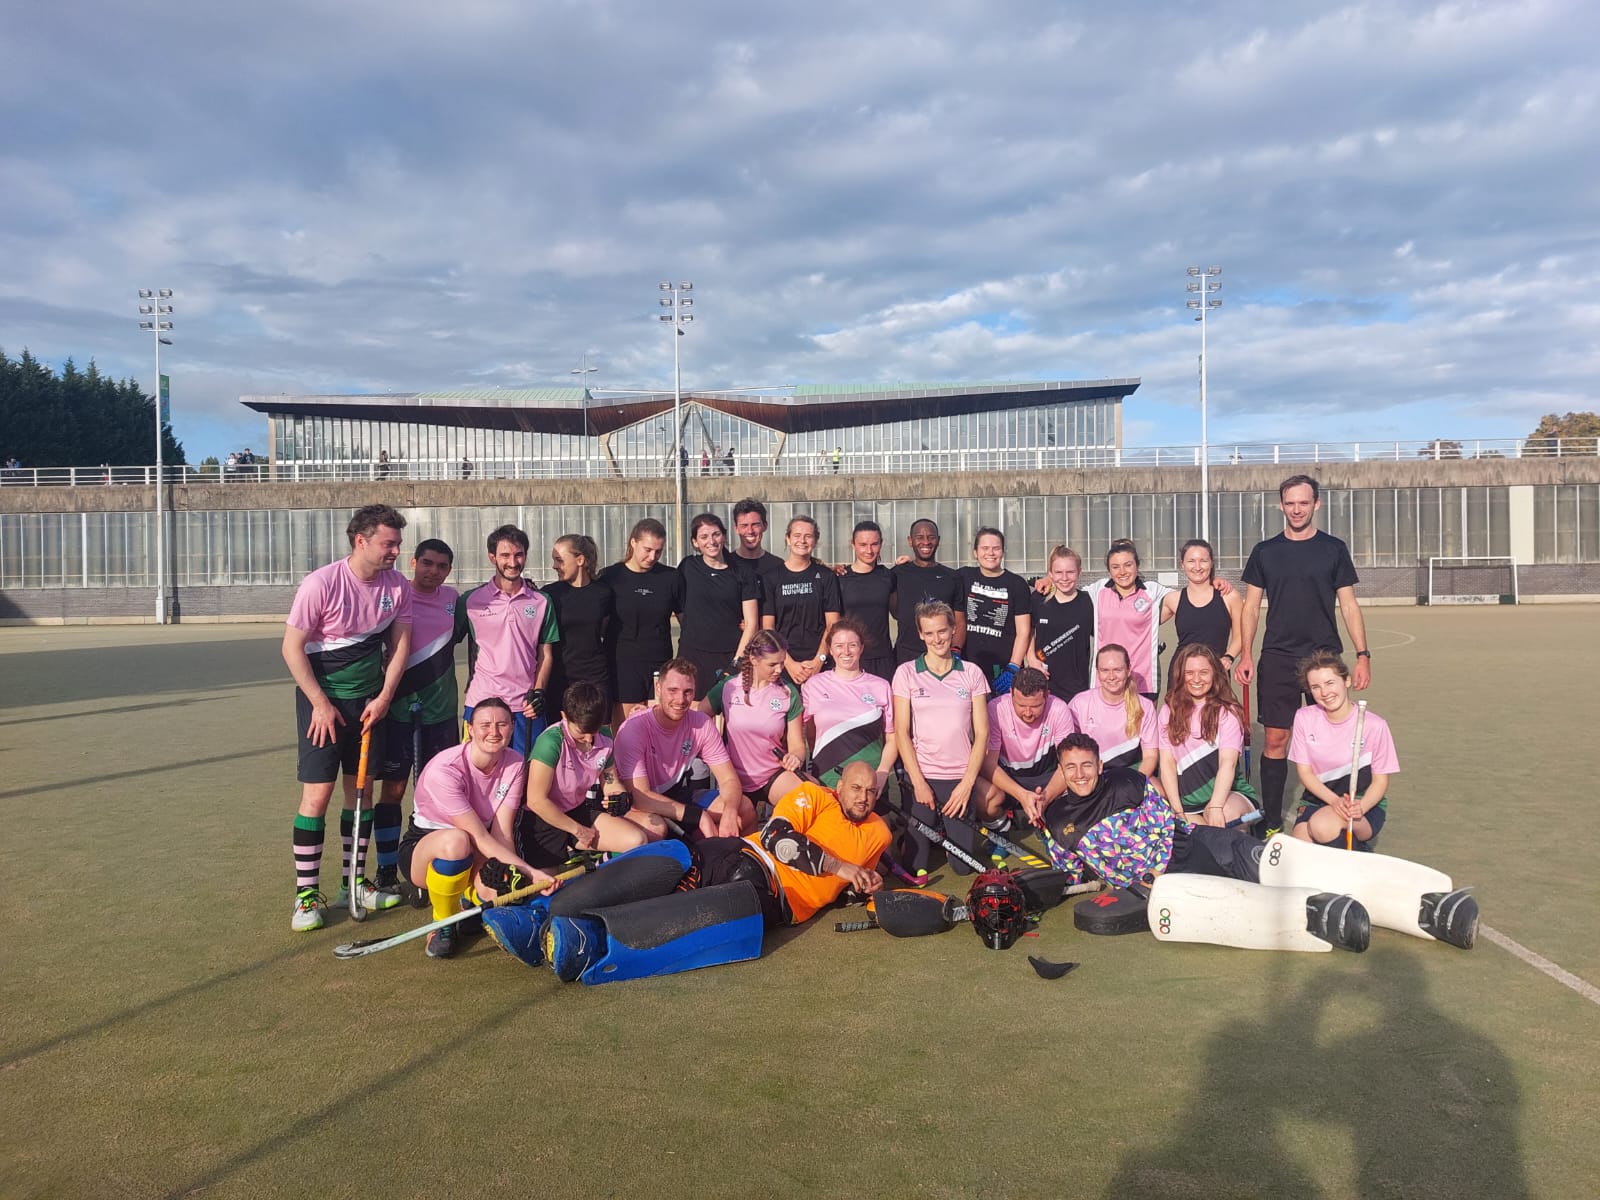 Group of people standing on a hockey pitch smiling